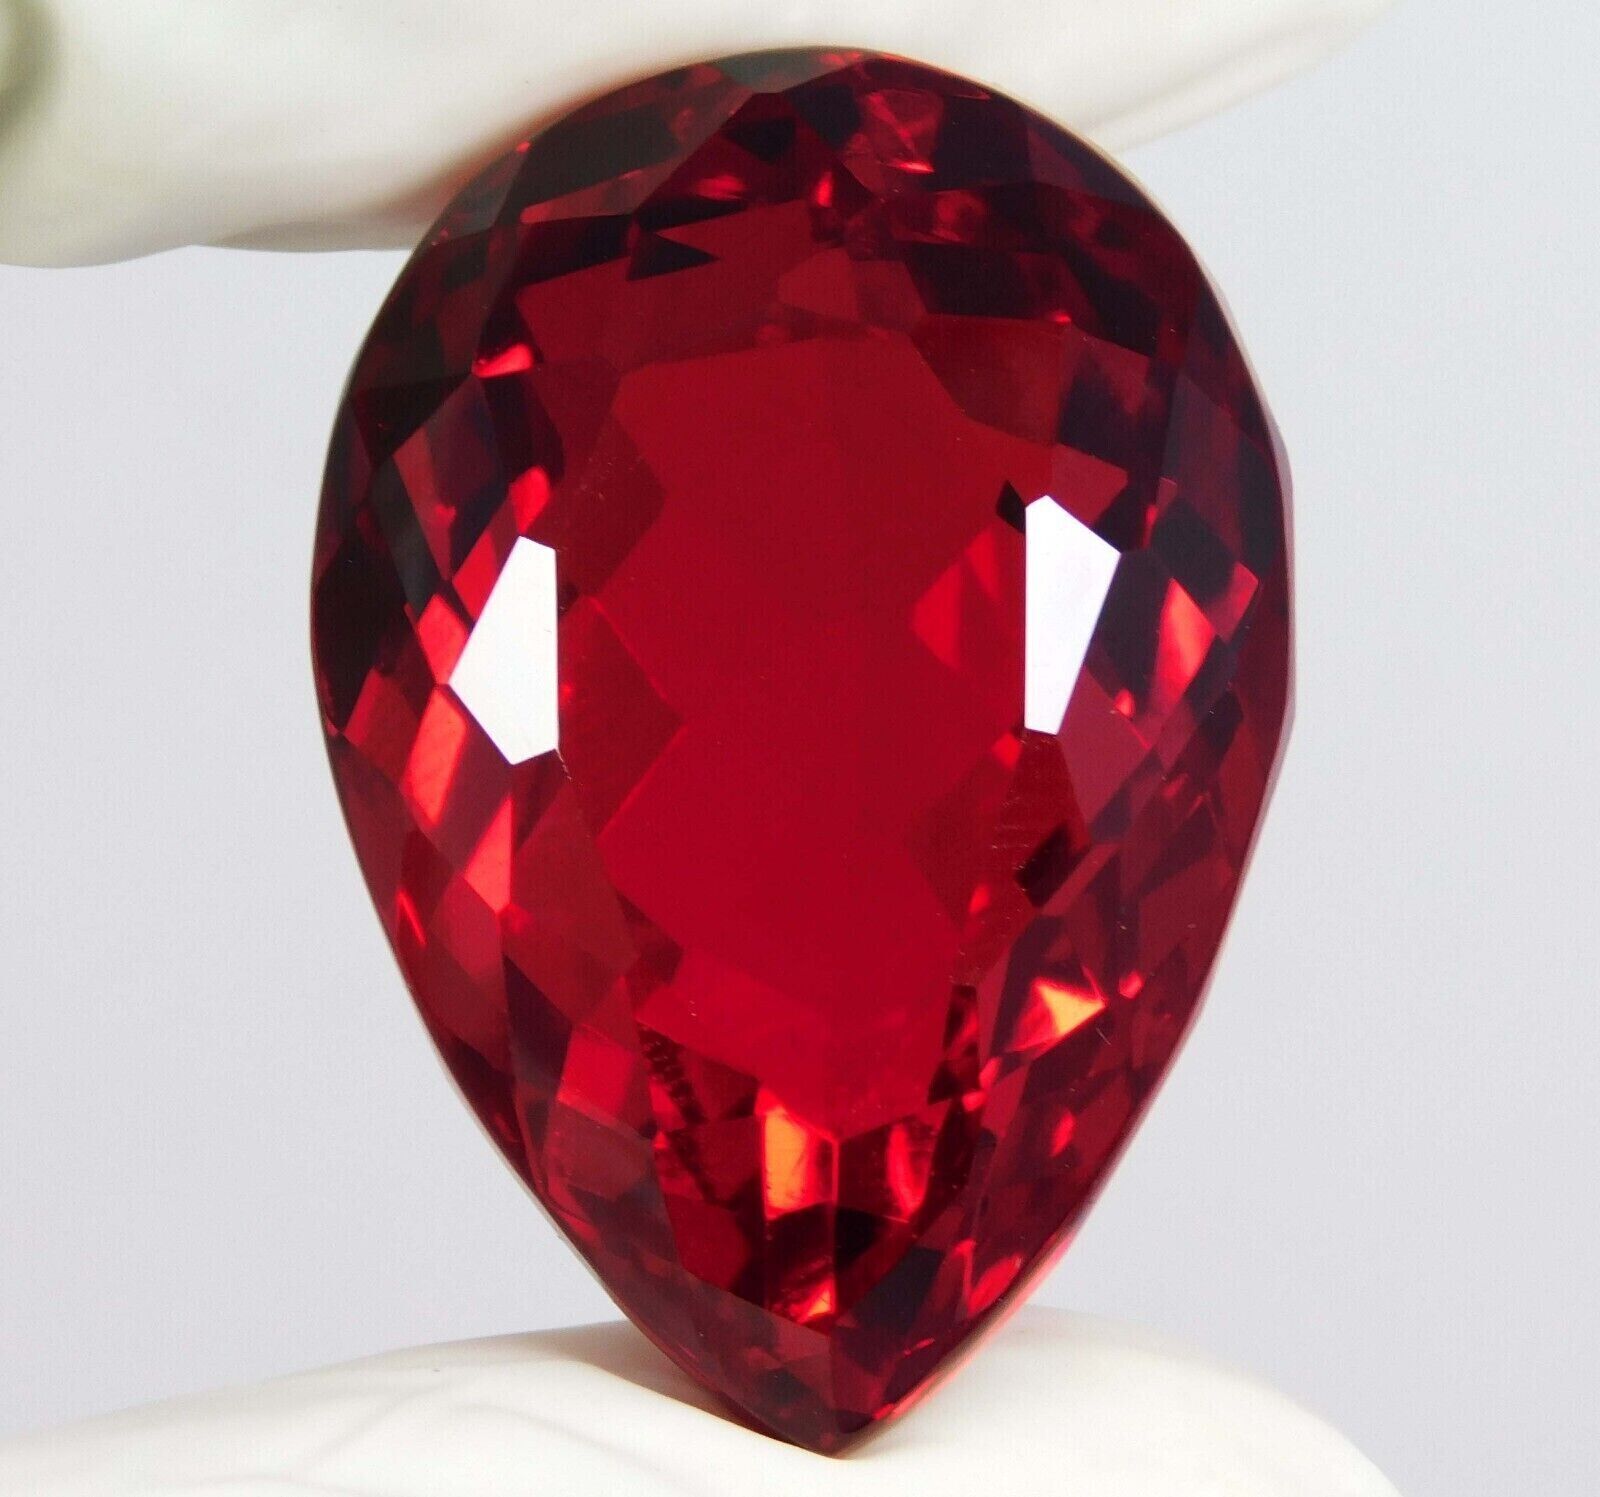 GIE Certified 99.15 Ct Mexican Fire Opal Red Natural Pear Cut Loose Gemstone